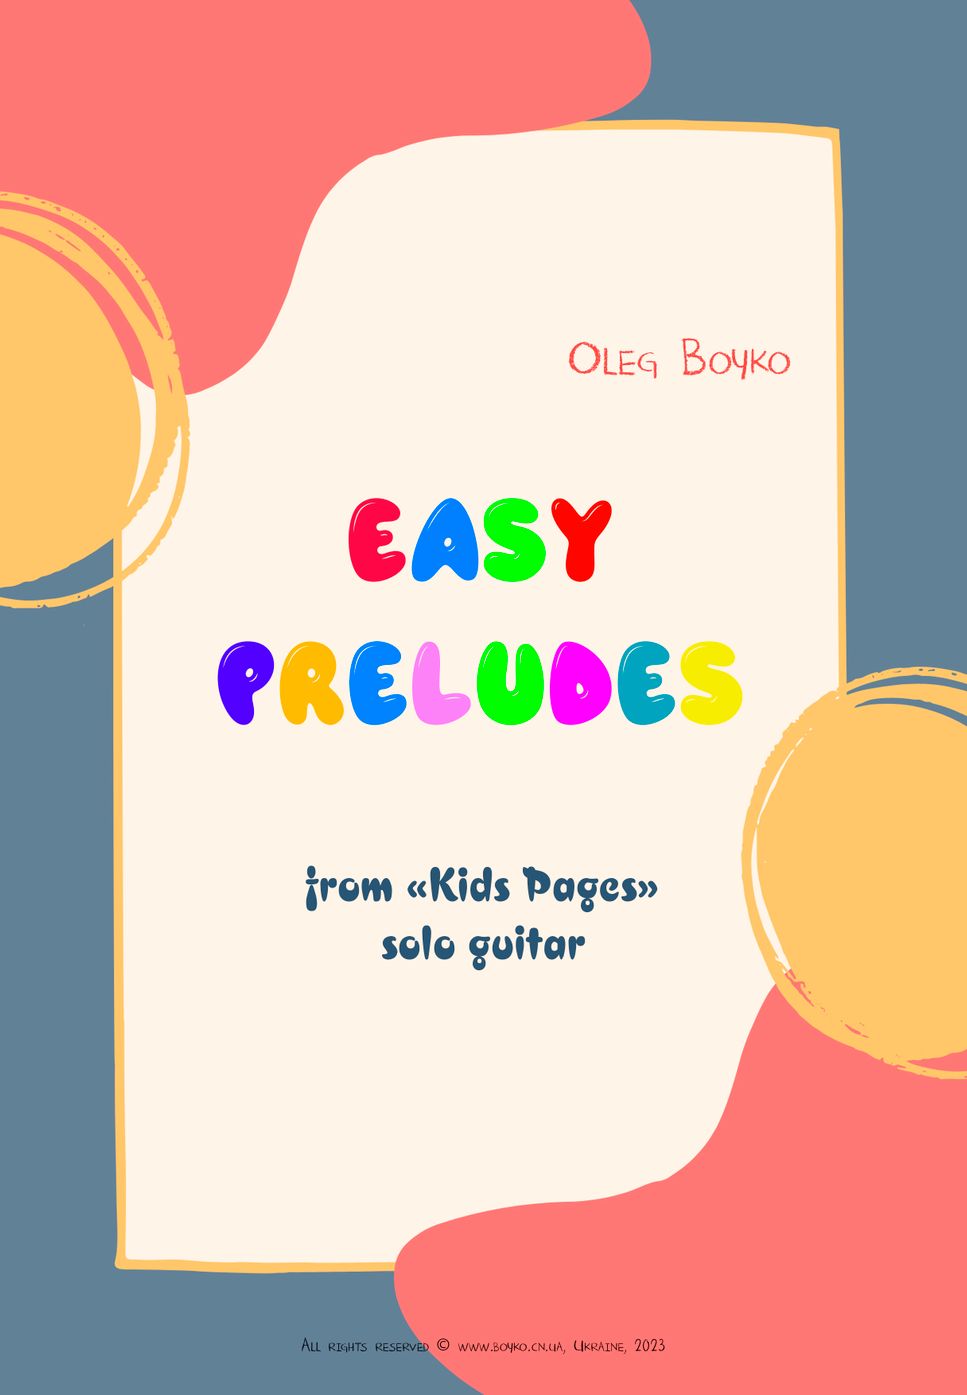 Easy Preludes from 'Kids Pages' by Oleg Boyko